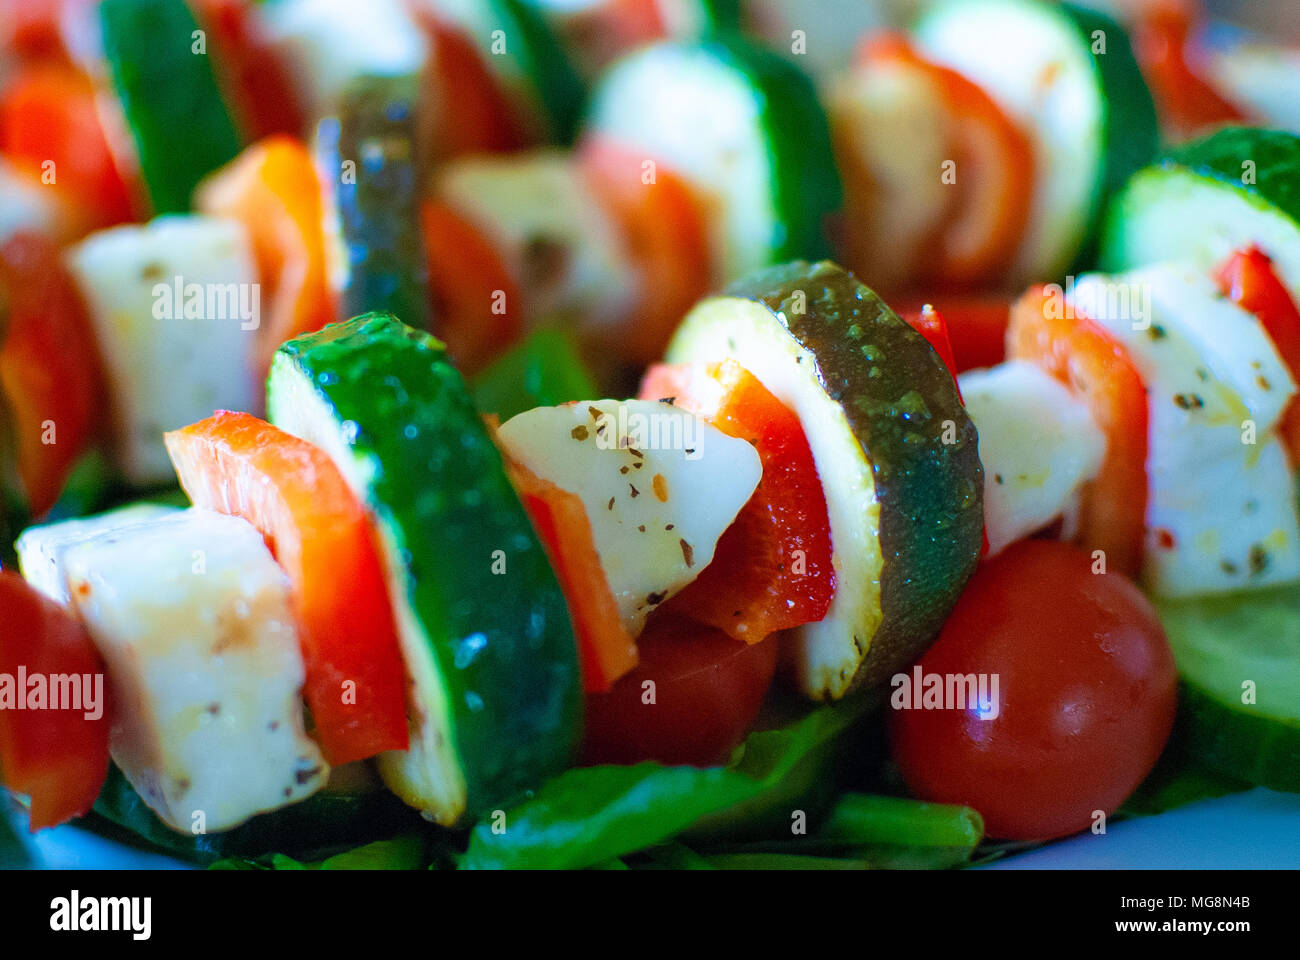 Halloumi, courgette, red pepper kebabs served on a salad bed, a healthy vegetarian meal. Stock Photo